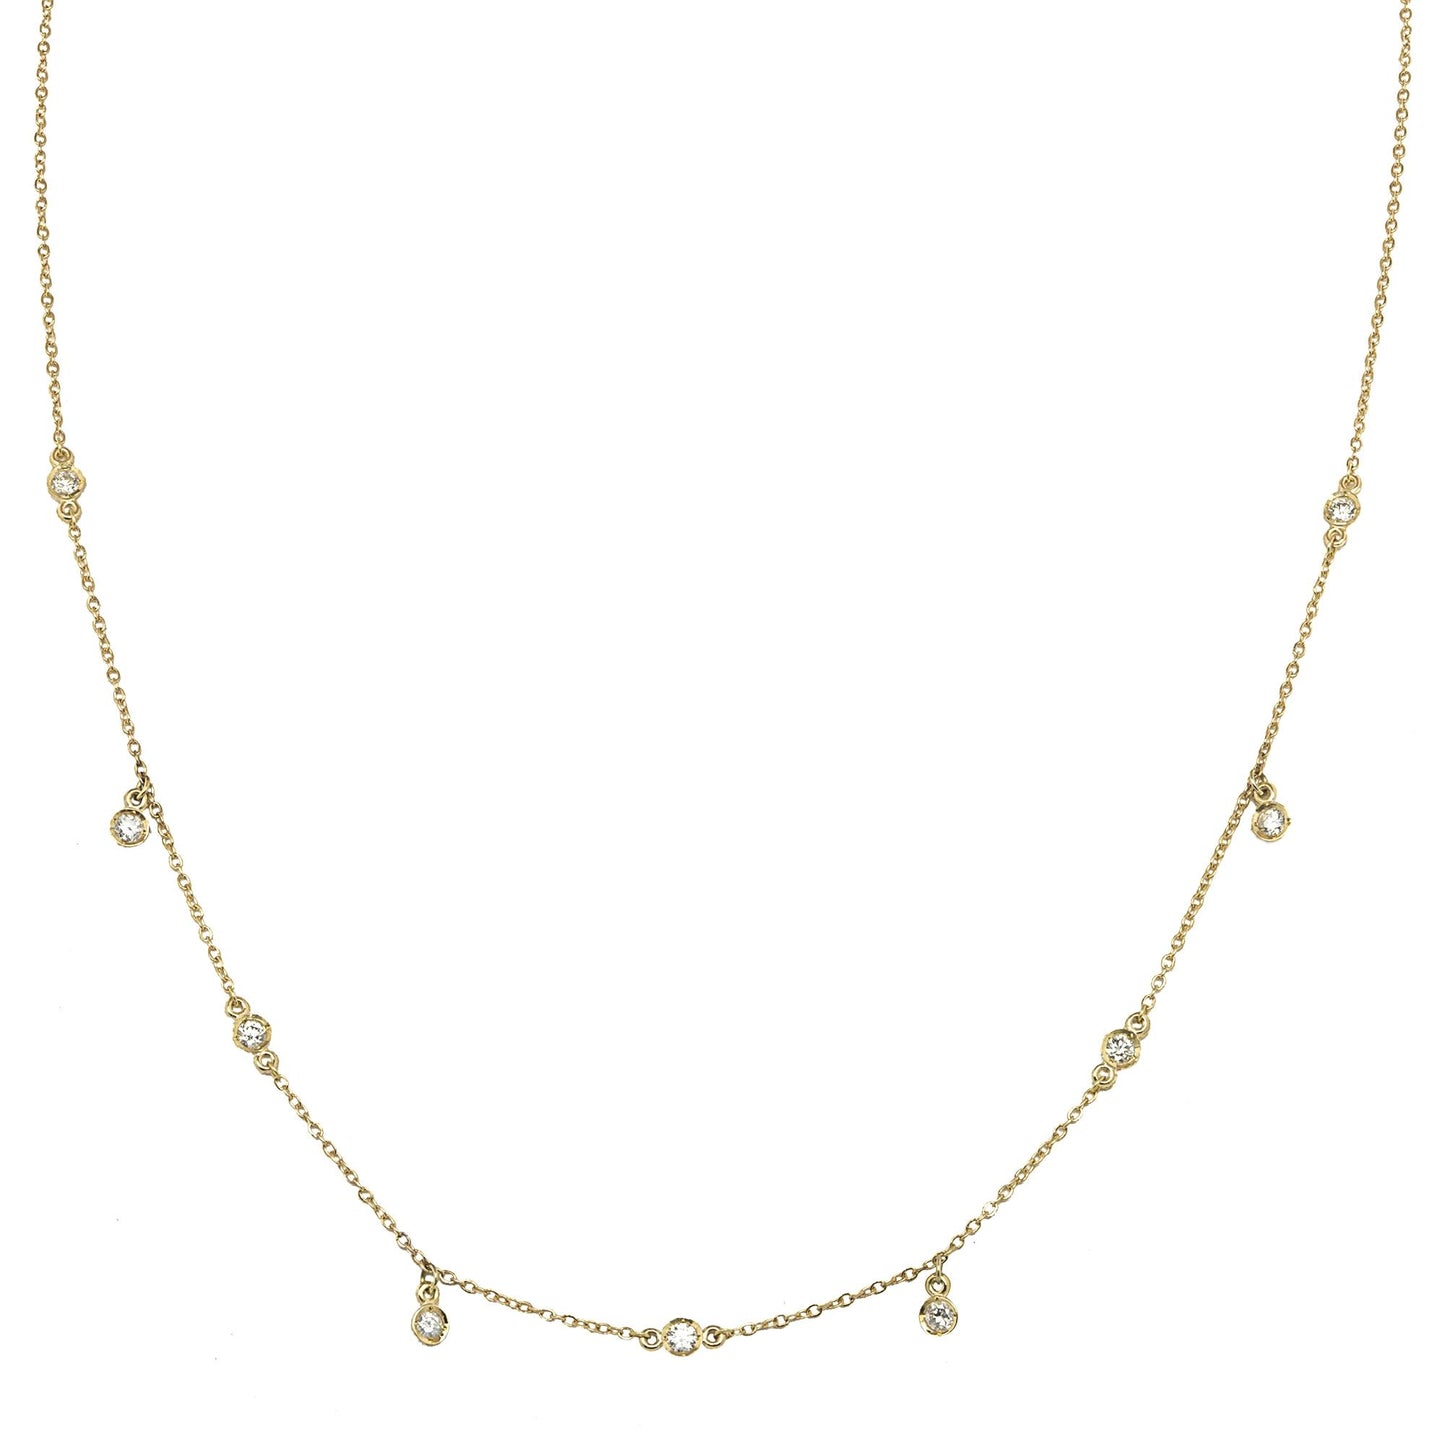 14K Yellow Gold Necklace with Diamond by the yard  0.80ct Round Diamonds. V0162